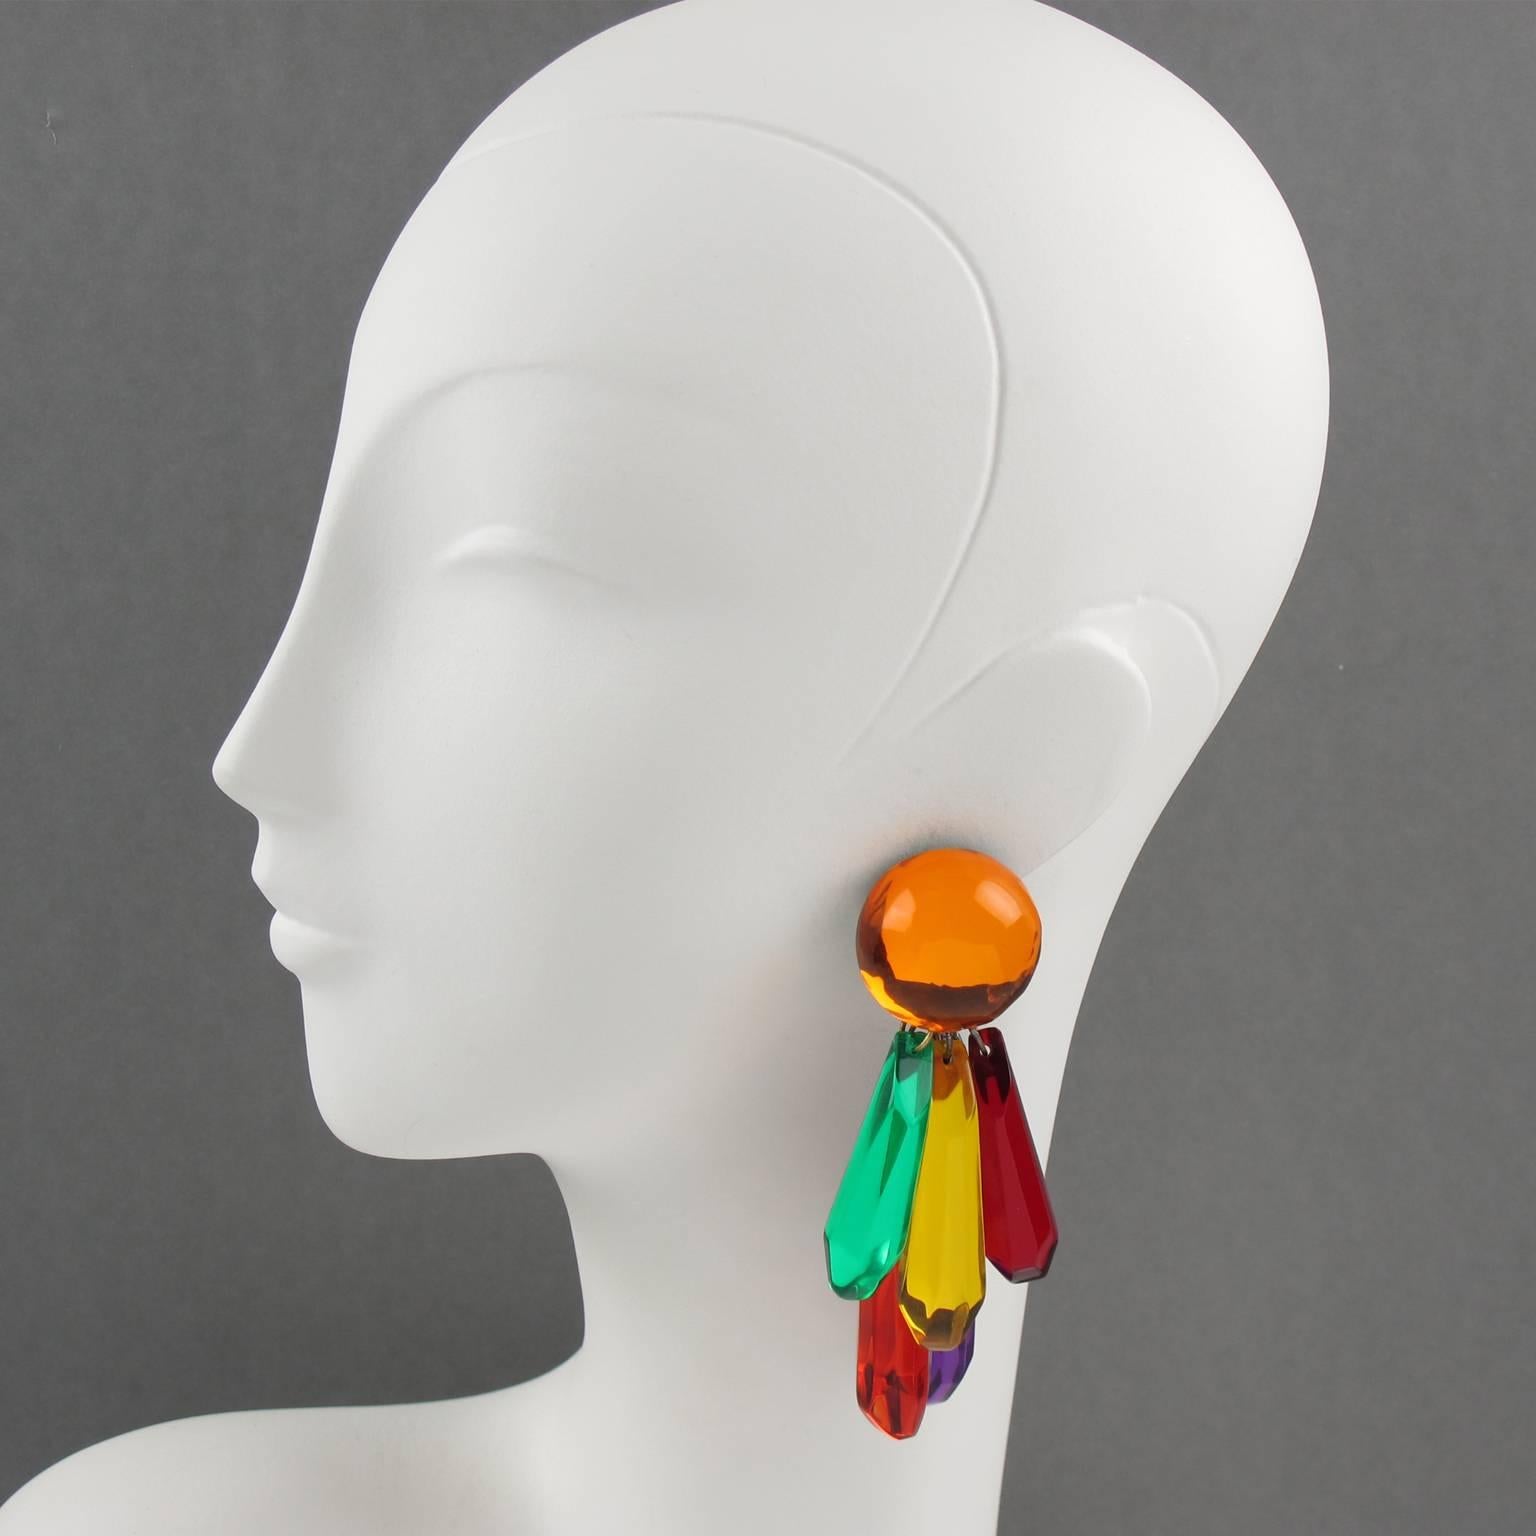 Vintage statement oversized dangling chandelier Lucite clip on earrings by Harriet Bauknight for Kaso. Huge dimensional shape with geometric dangling charms with mirror texture pattern. Assorted colors of electric orange, lime green, yellow, fire